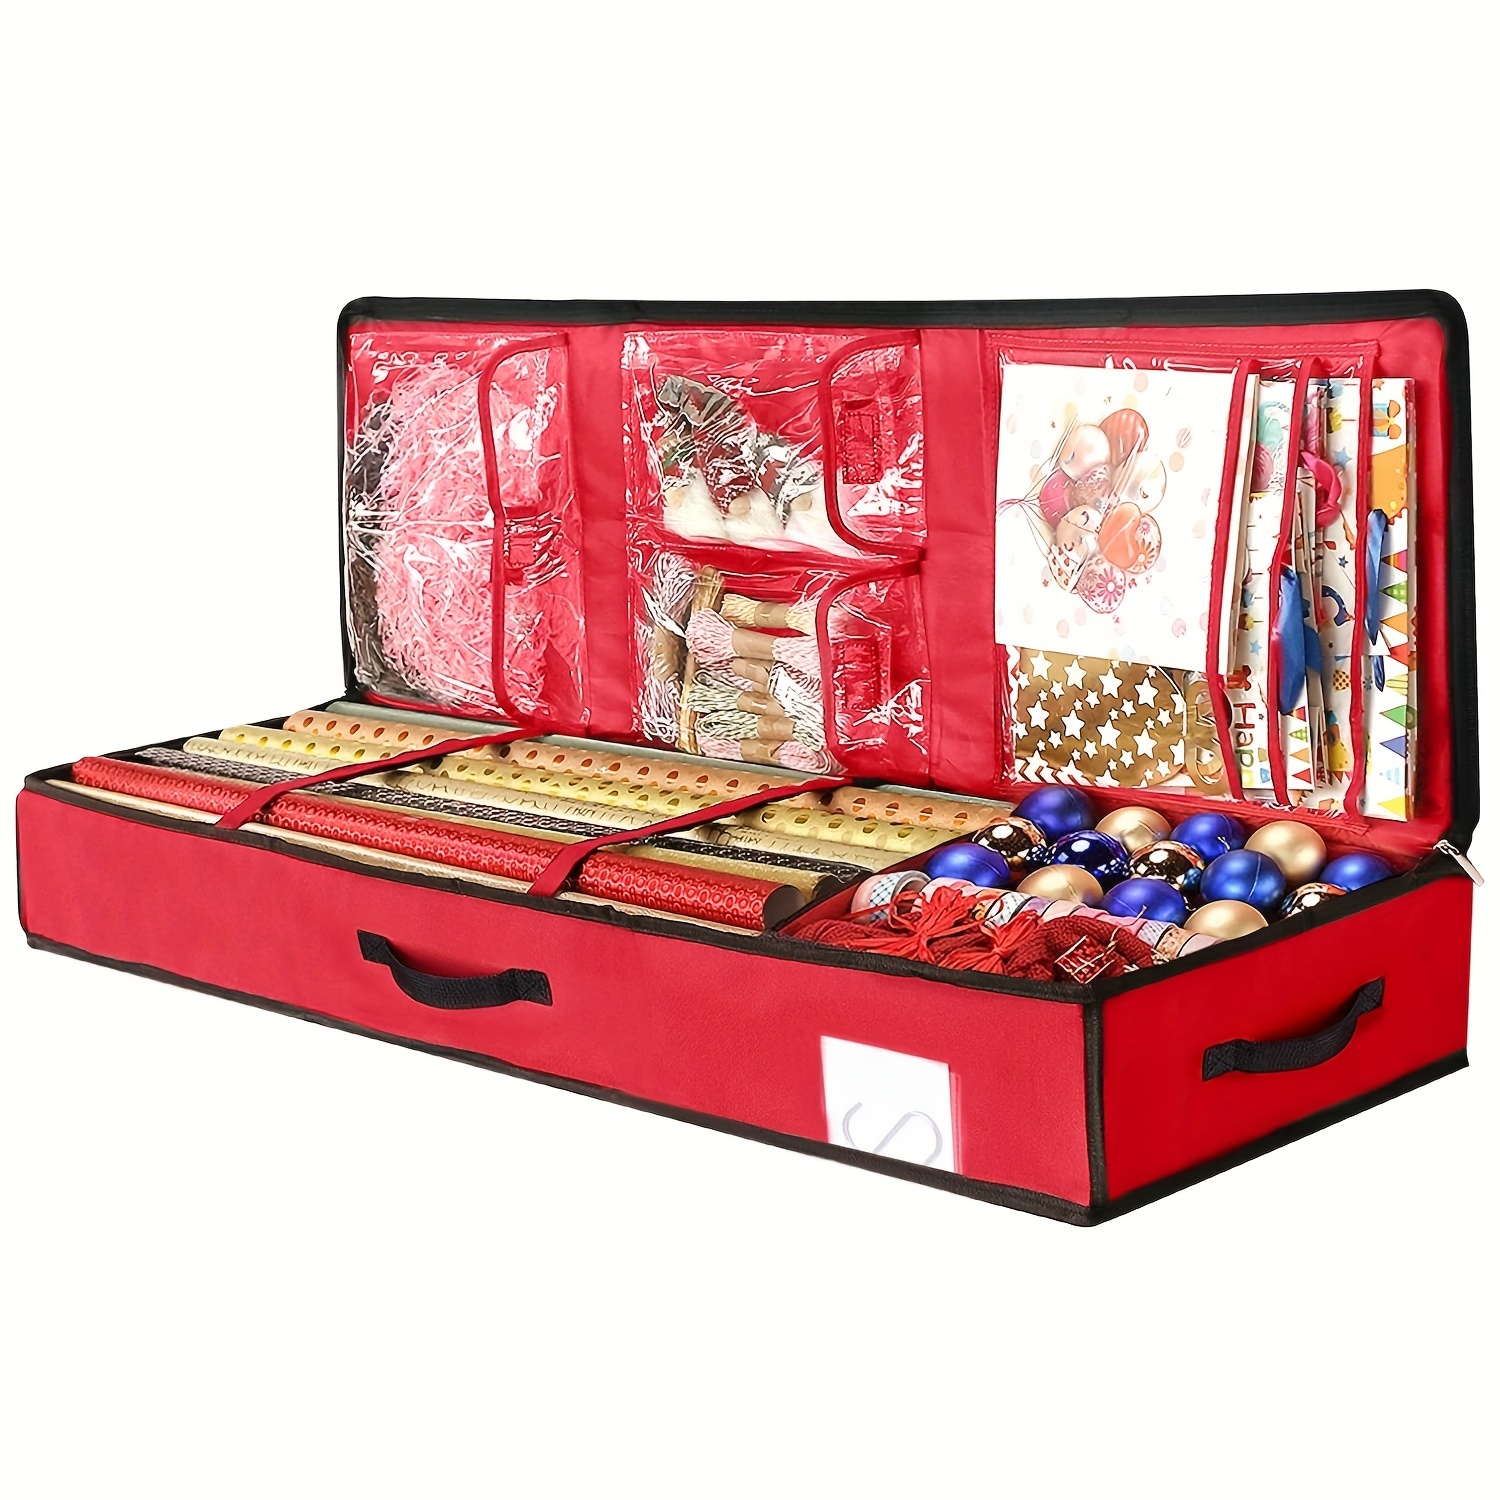 wilbest Underbed Gift Wrap Organizer, Wrapping Paper Storage Box and Interior Pockets, Fits 18-24 Standard Rolls, Underbed Storage Holiday, Red